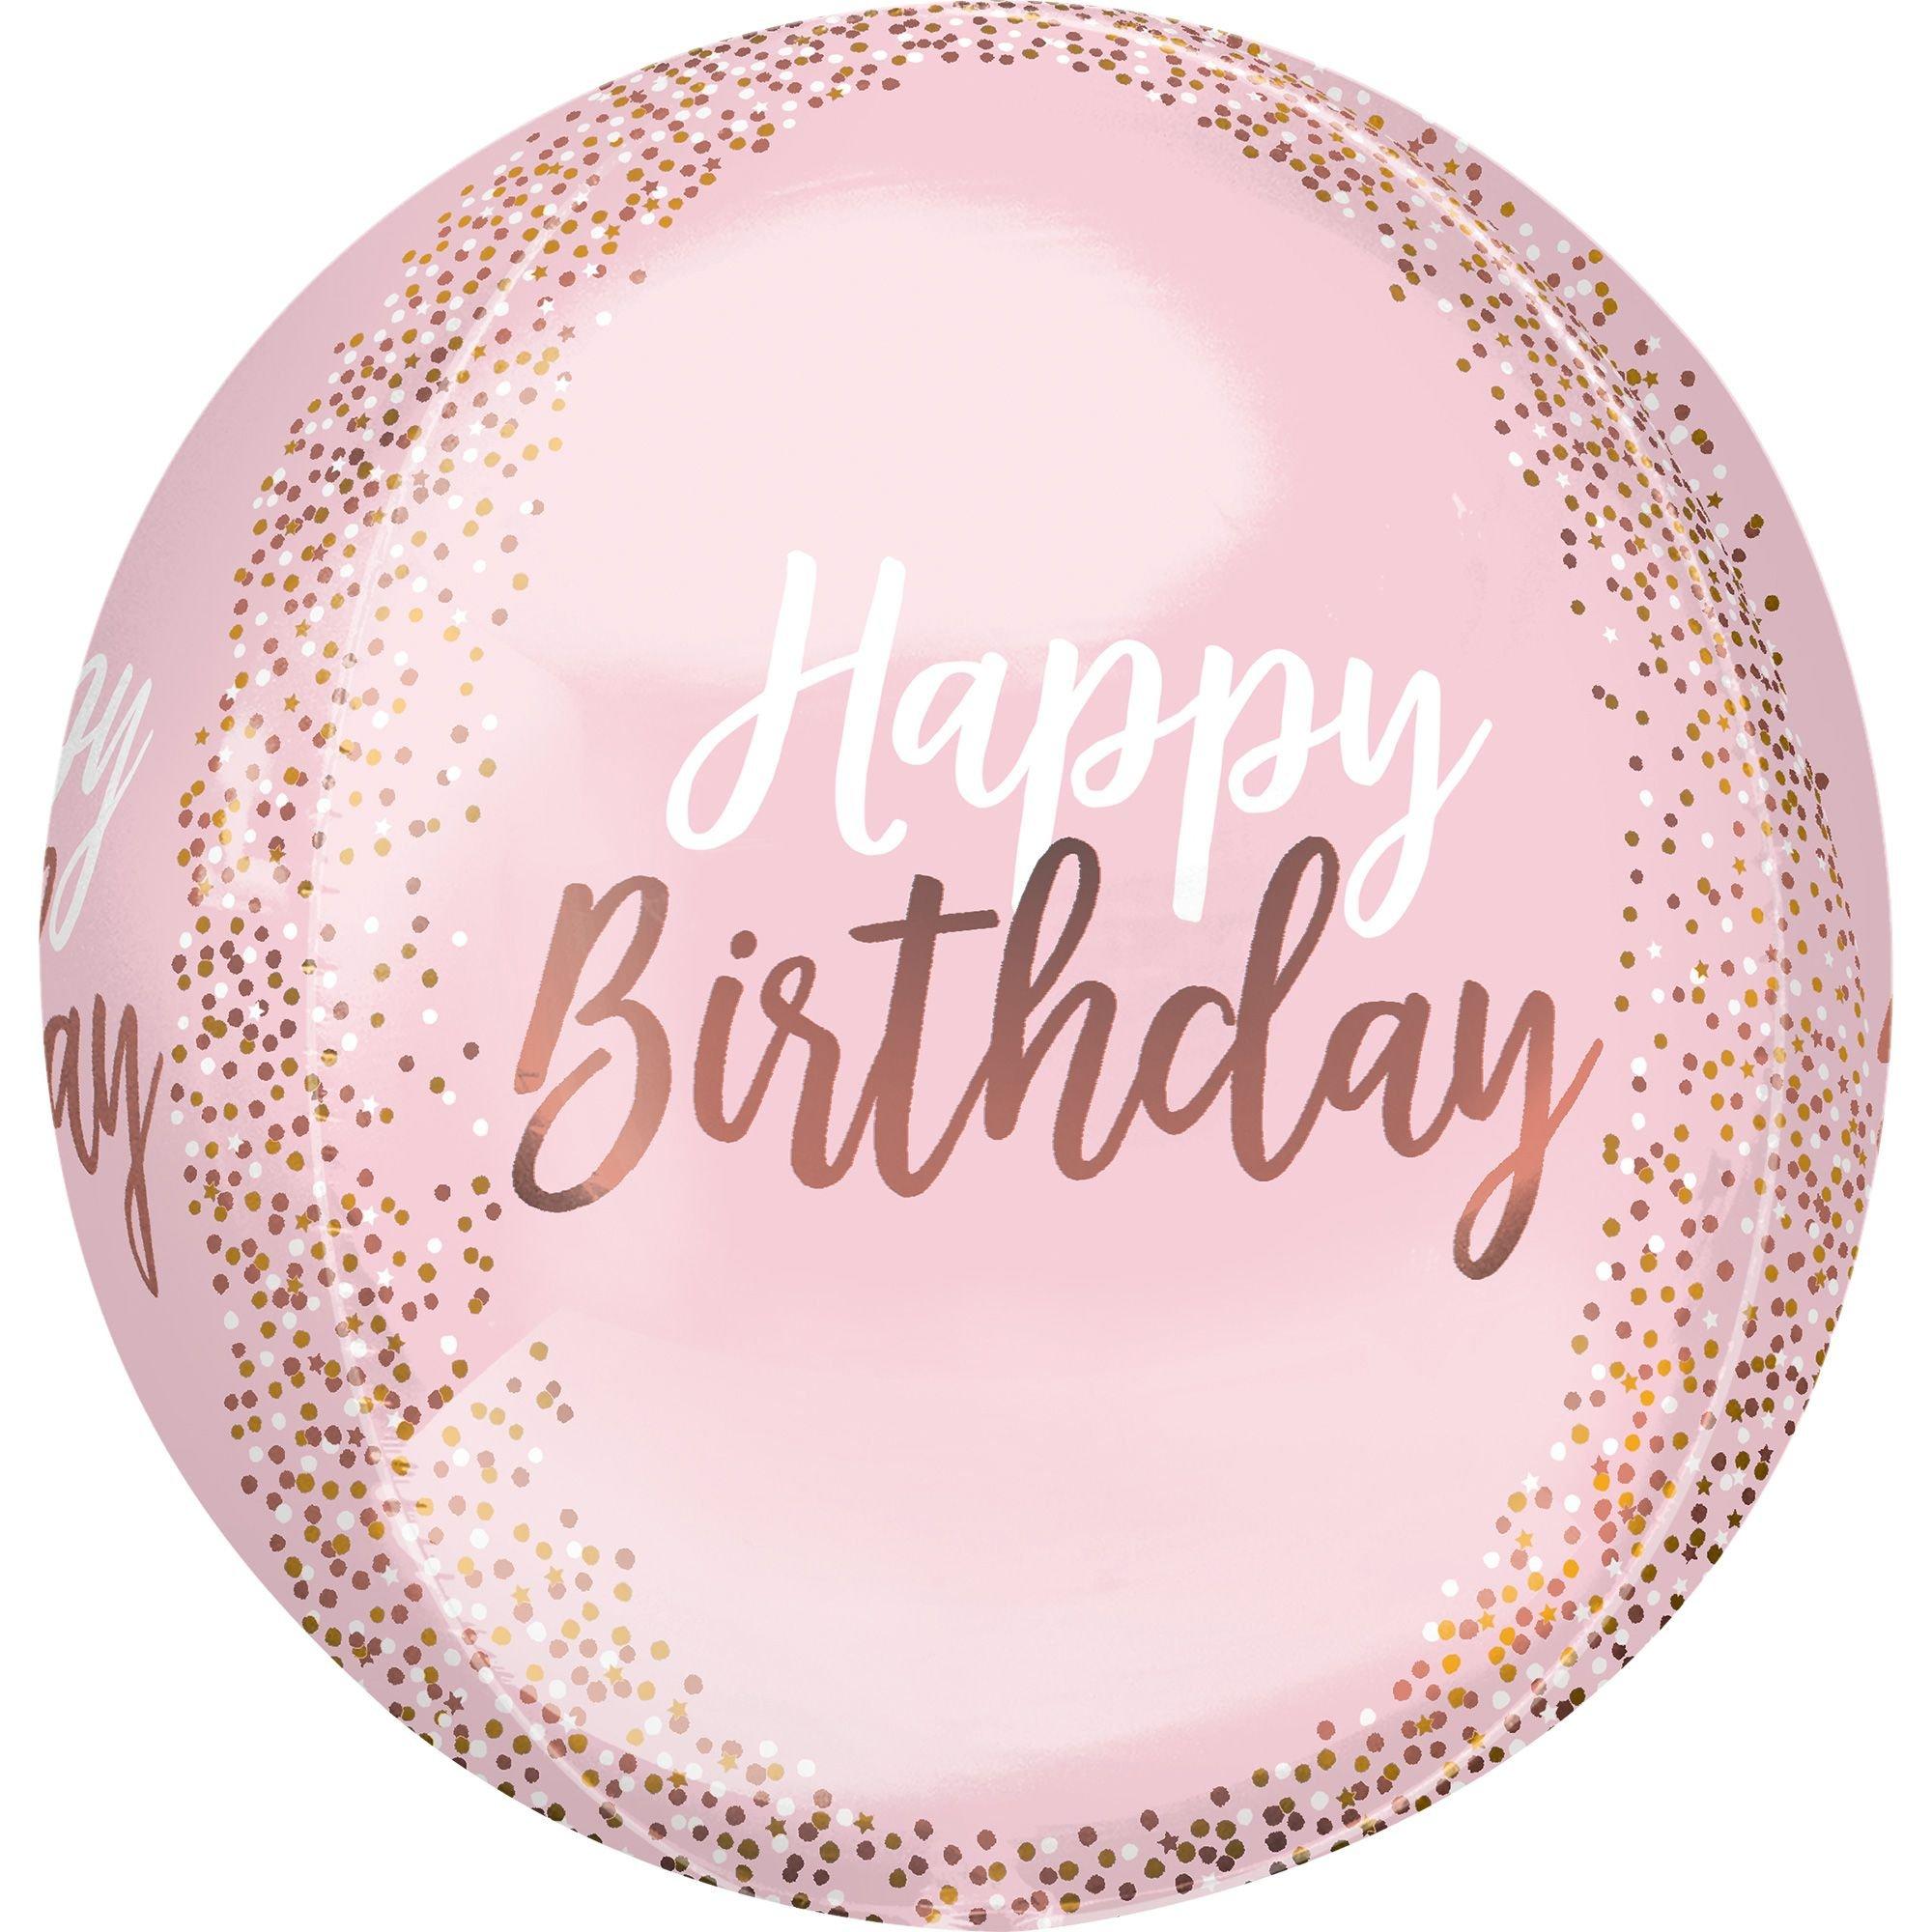 Blush Pink Happy Birthday Balloon, 15in x 16in - Orbz | Party City